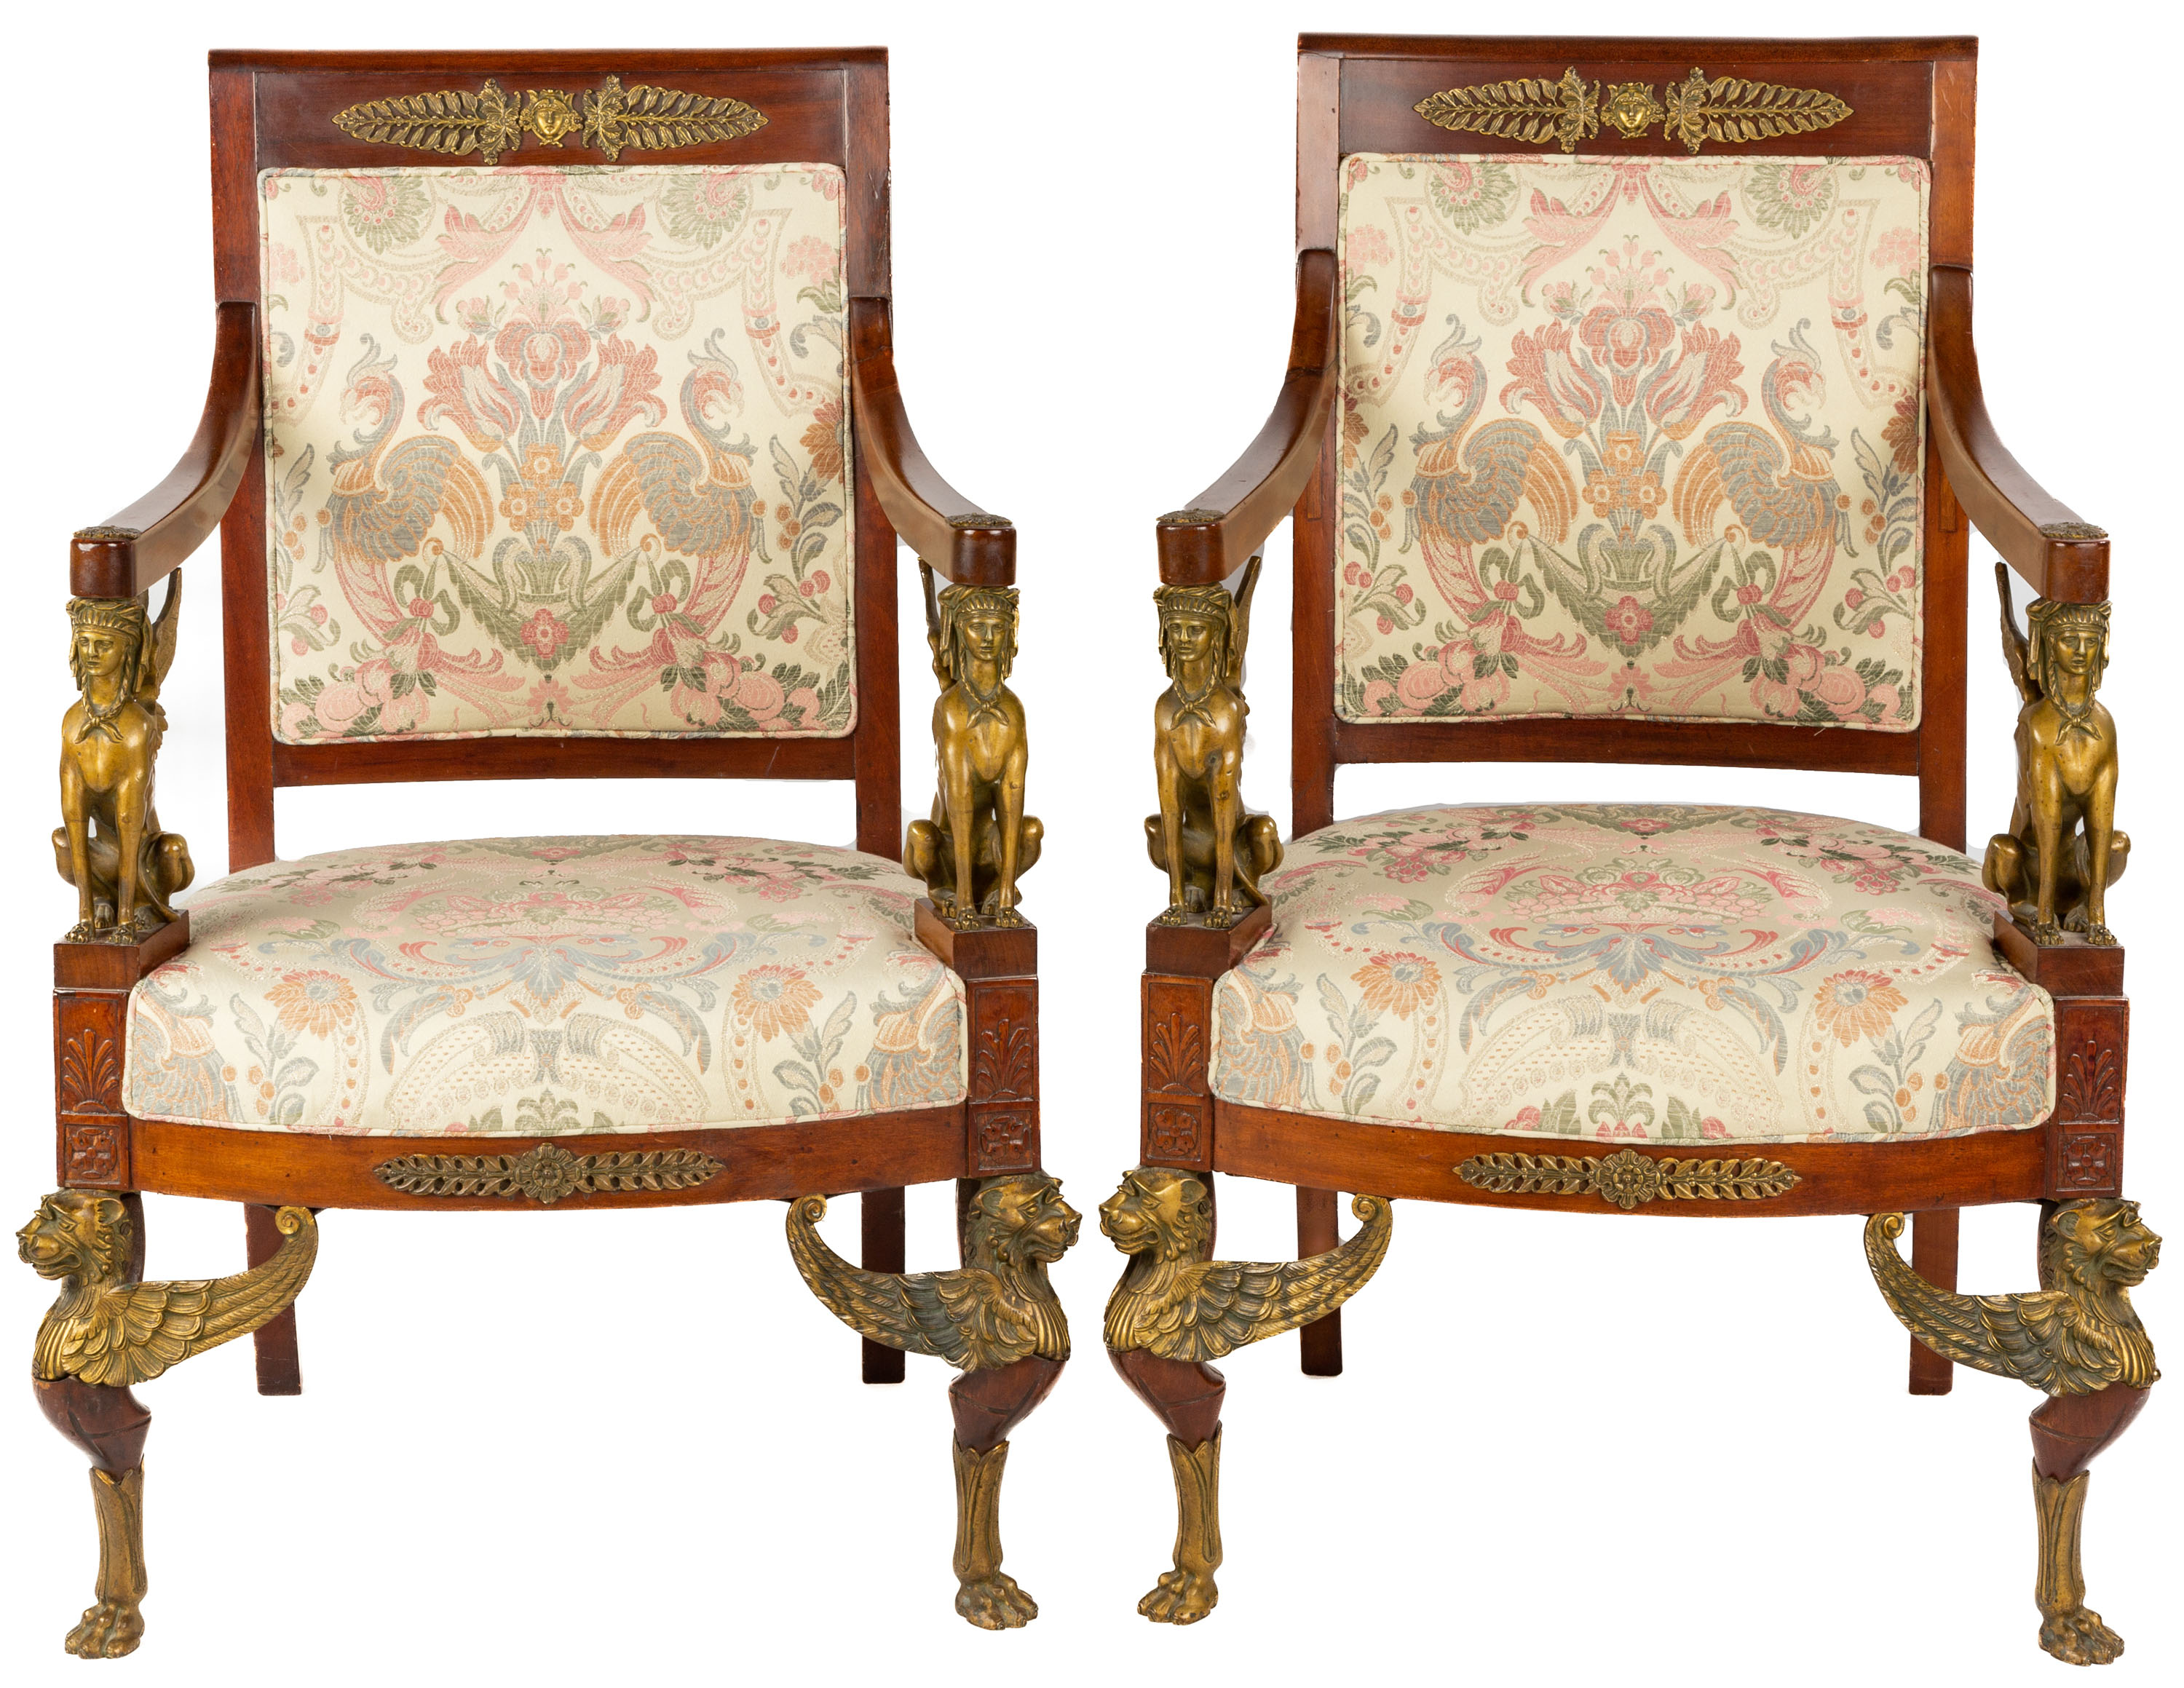 PAIR OF FRENCH EGYPTIAN REVIVAL